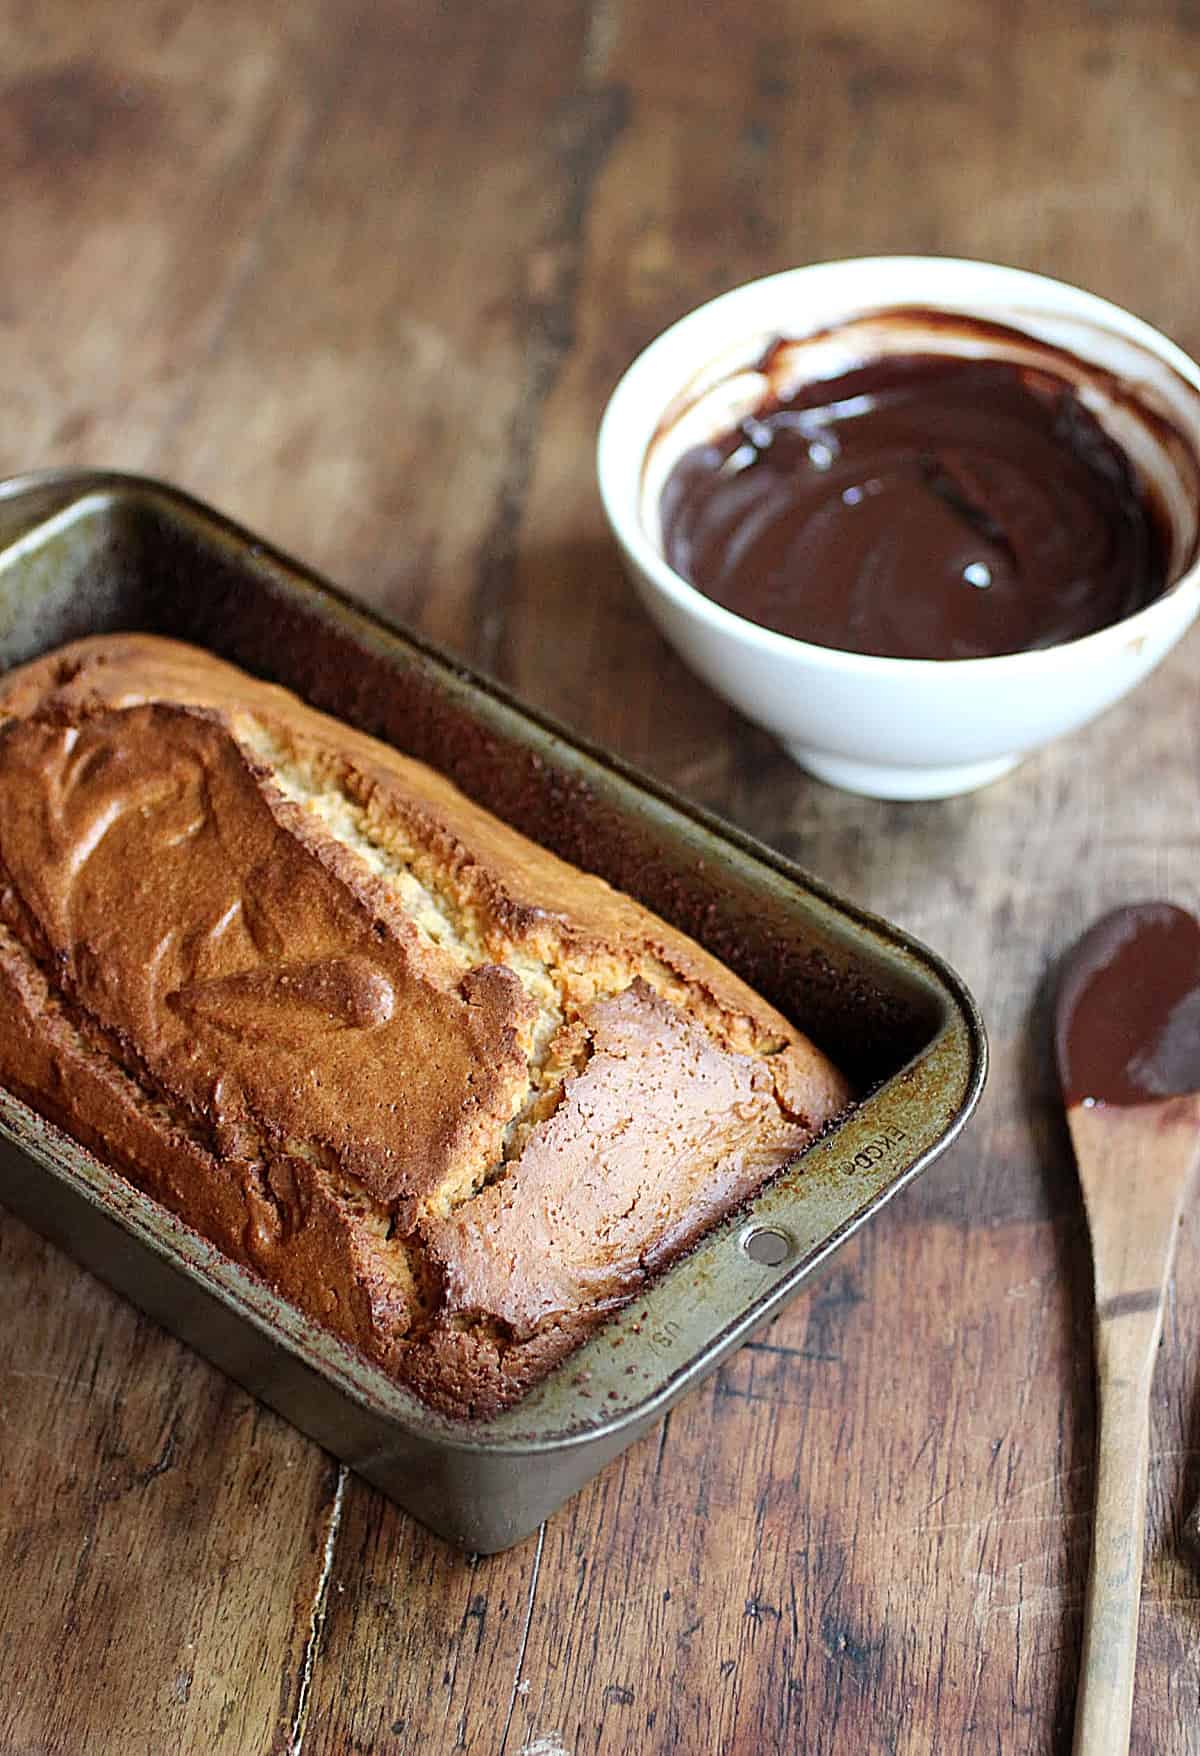 Loaf of quick bread in metal pan, bowl with chocolate sauce, wooden table.